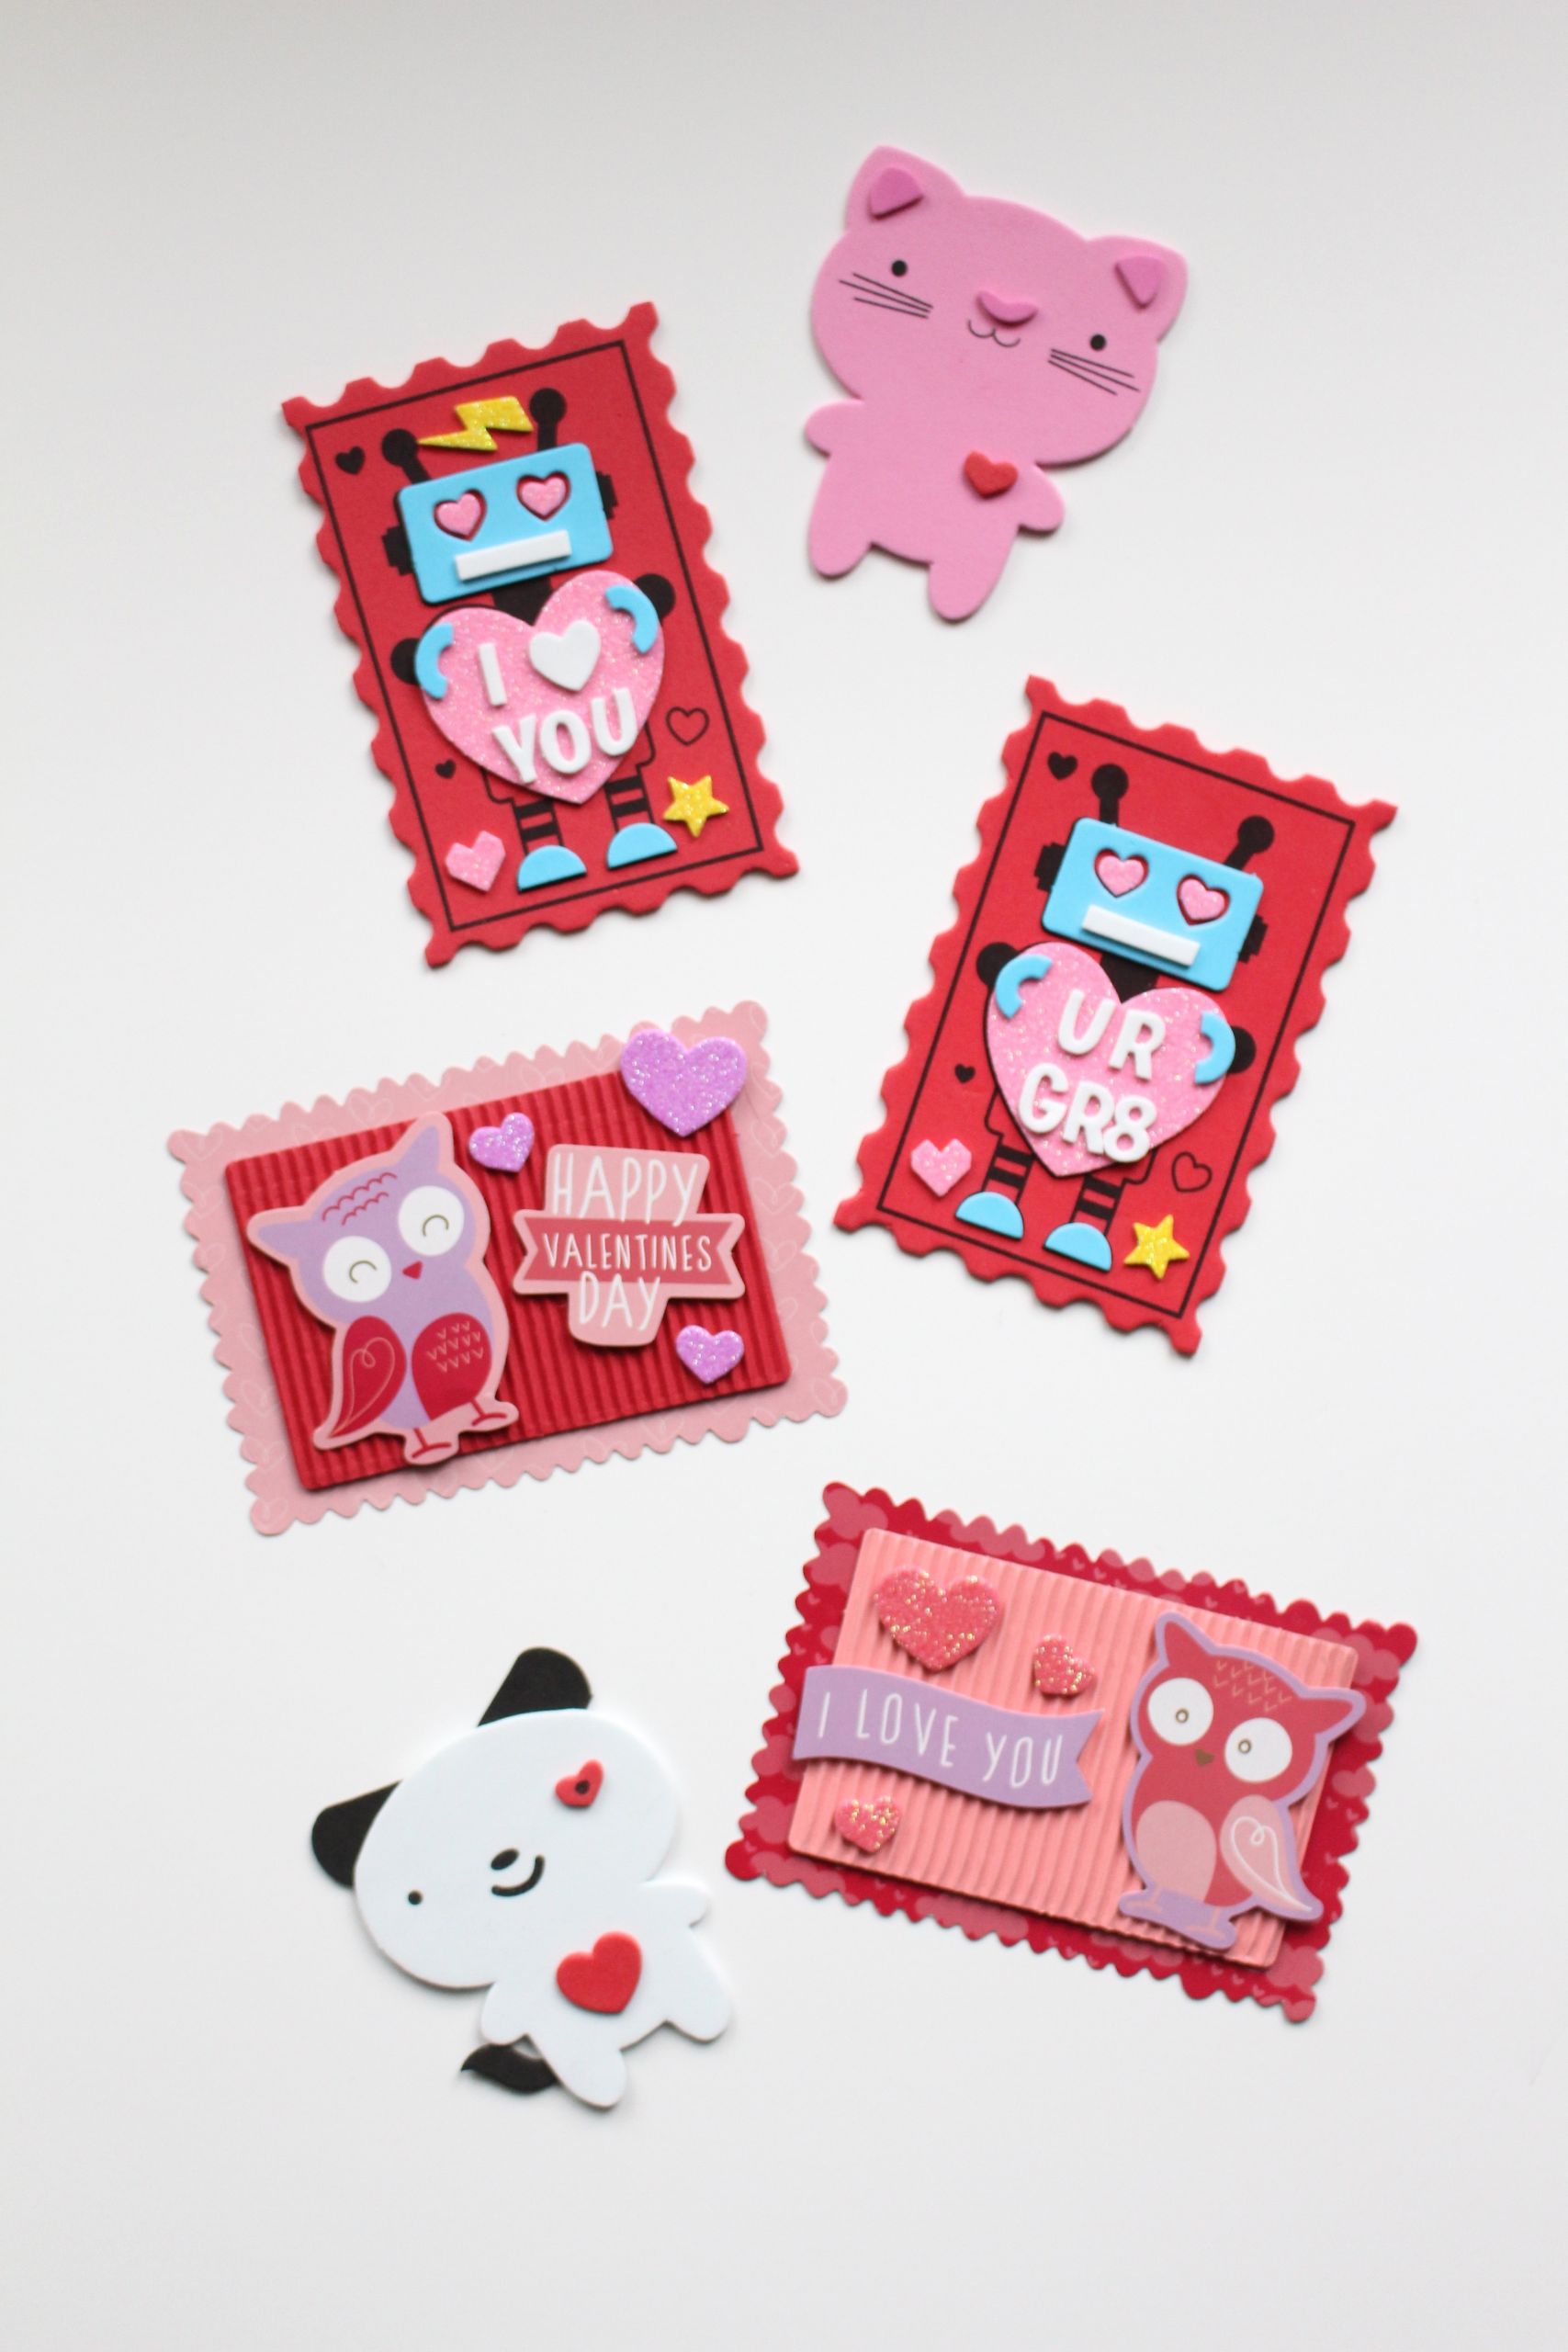 Gift Ideas For Kids For Valentines Day
 DIY Valentine s Day Ideas for Kids